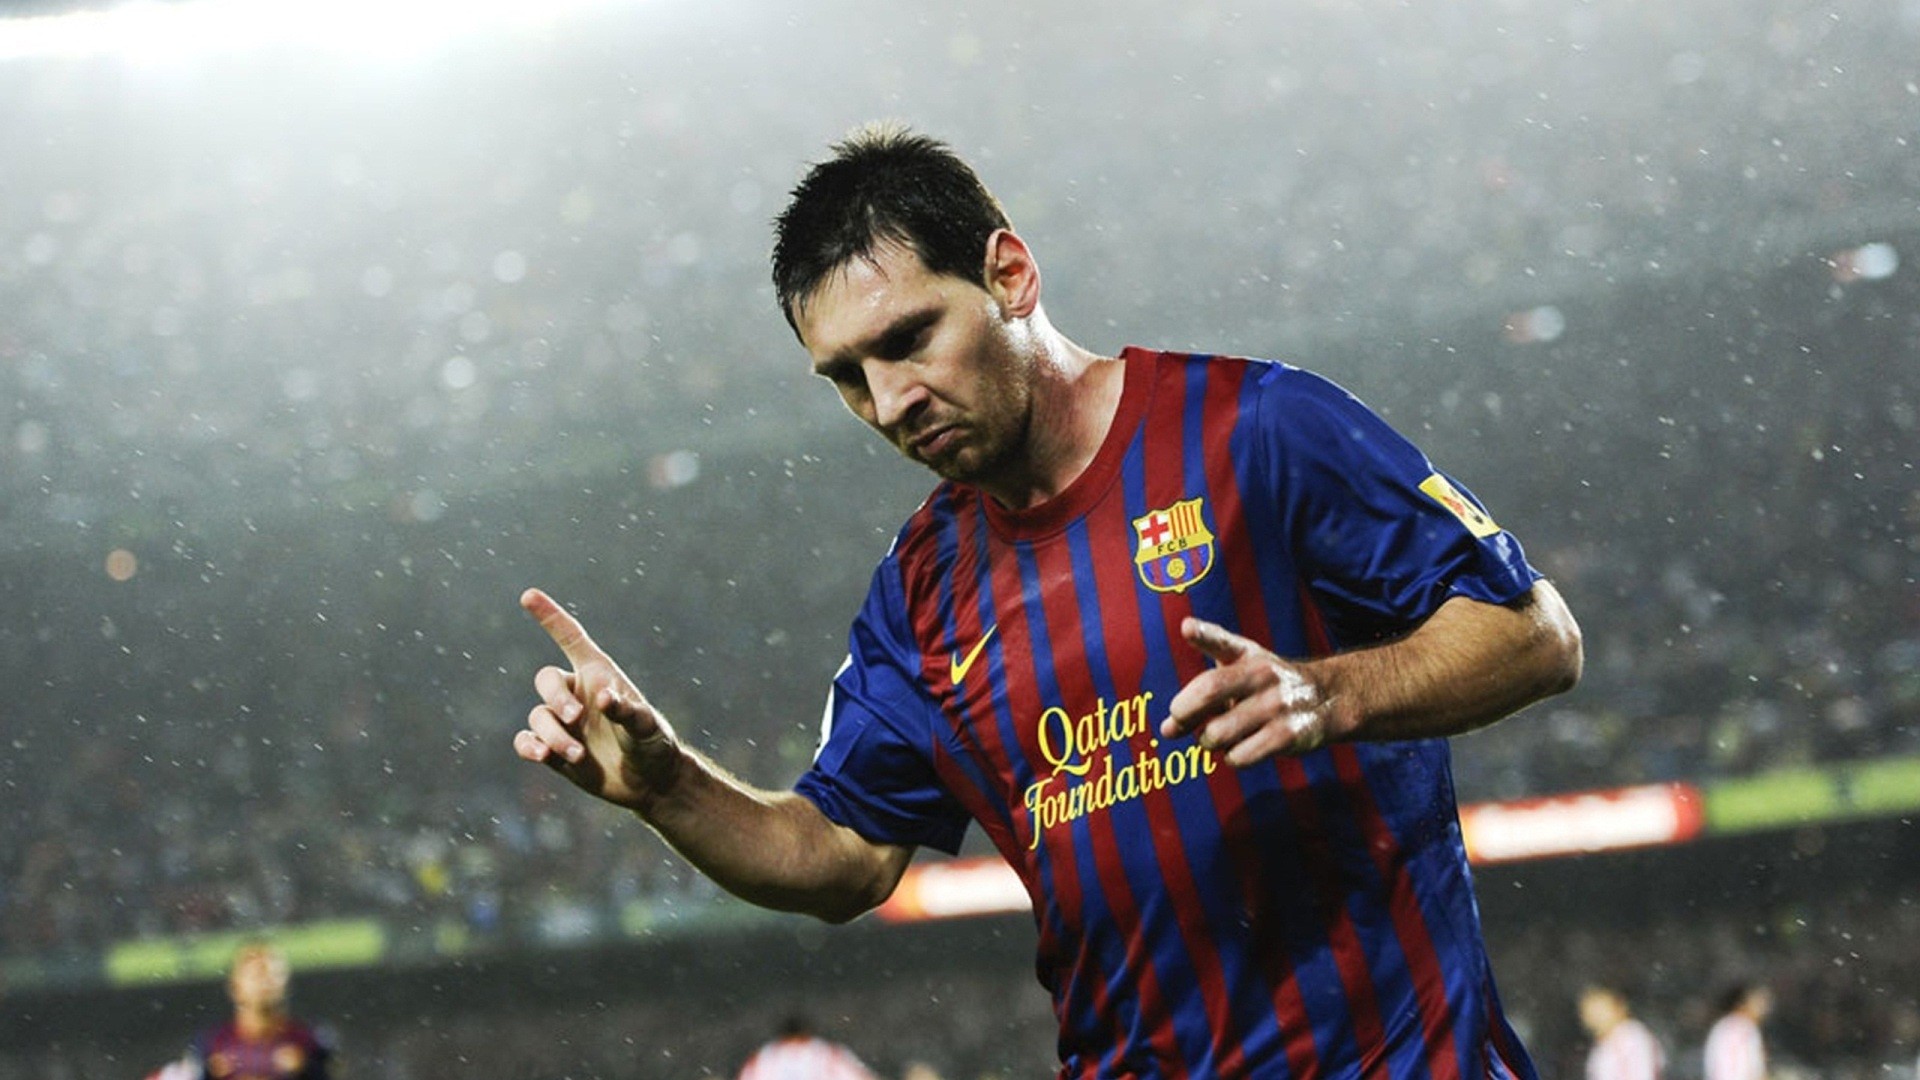 1920x1080 Lionel Messi Fc Barcelona Football Wallpapers Hd 0165